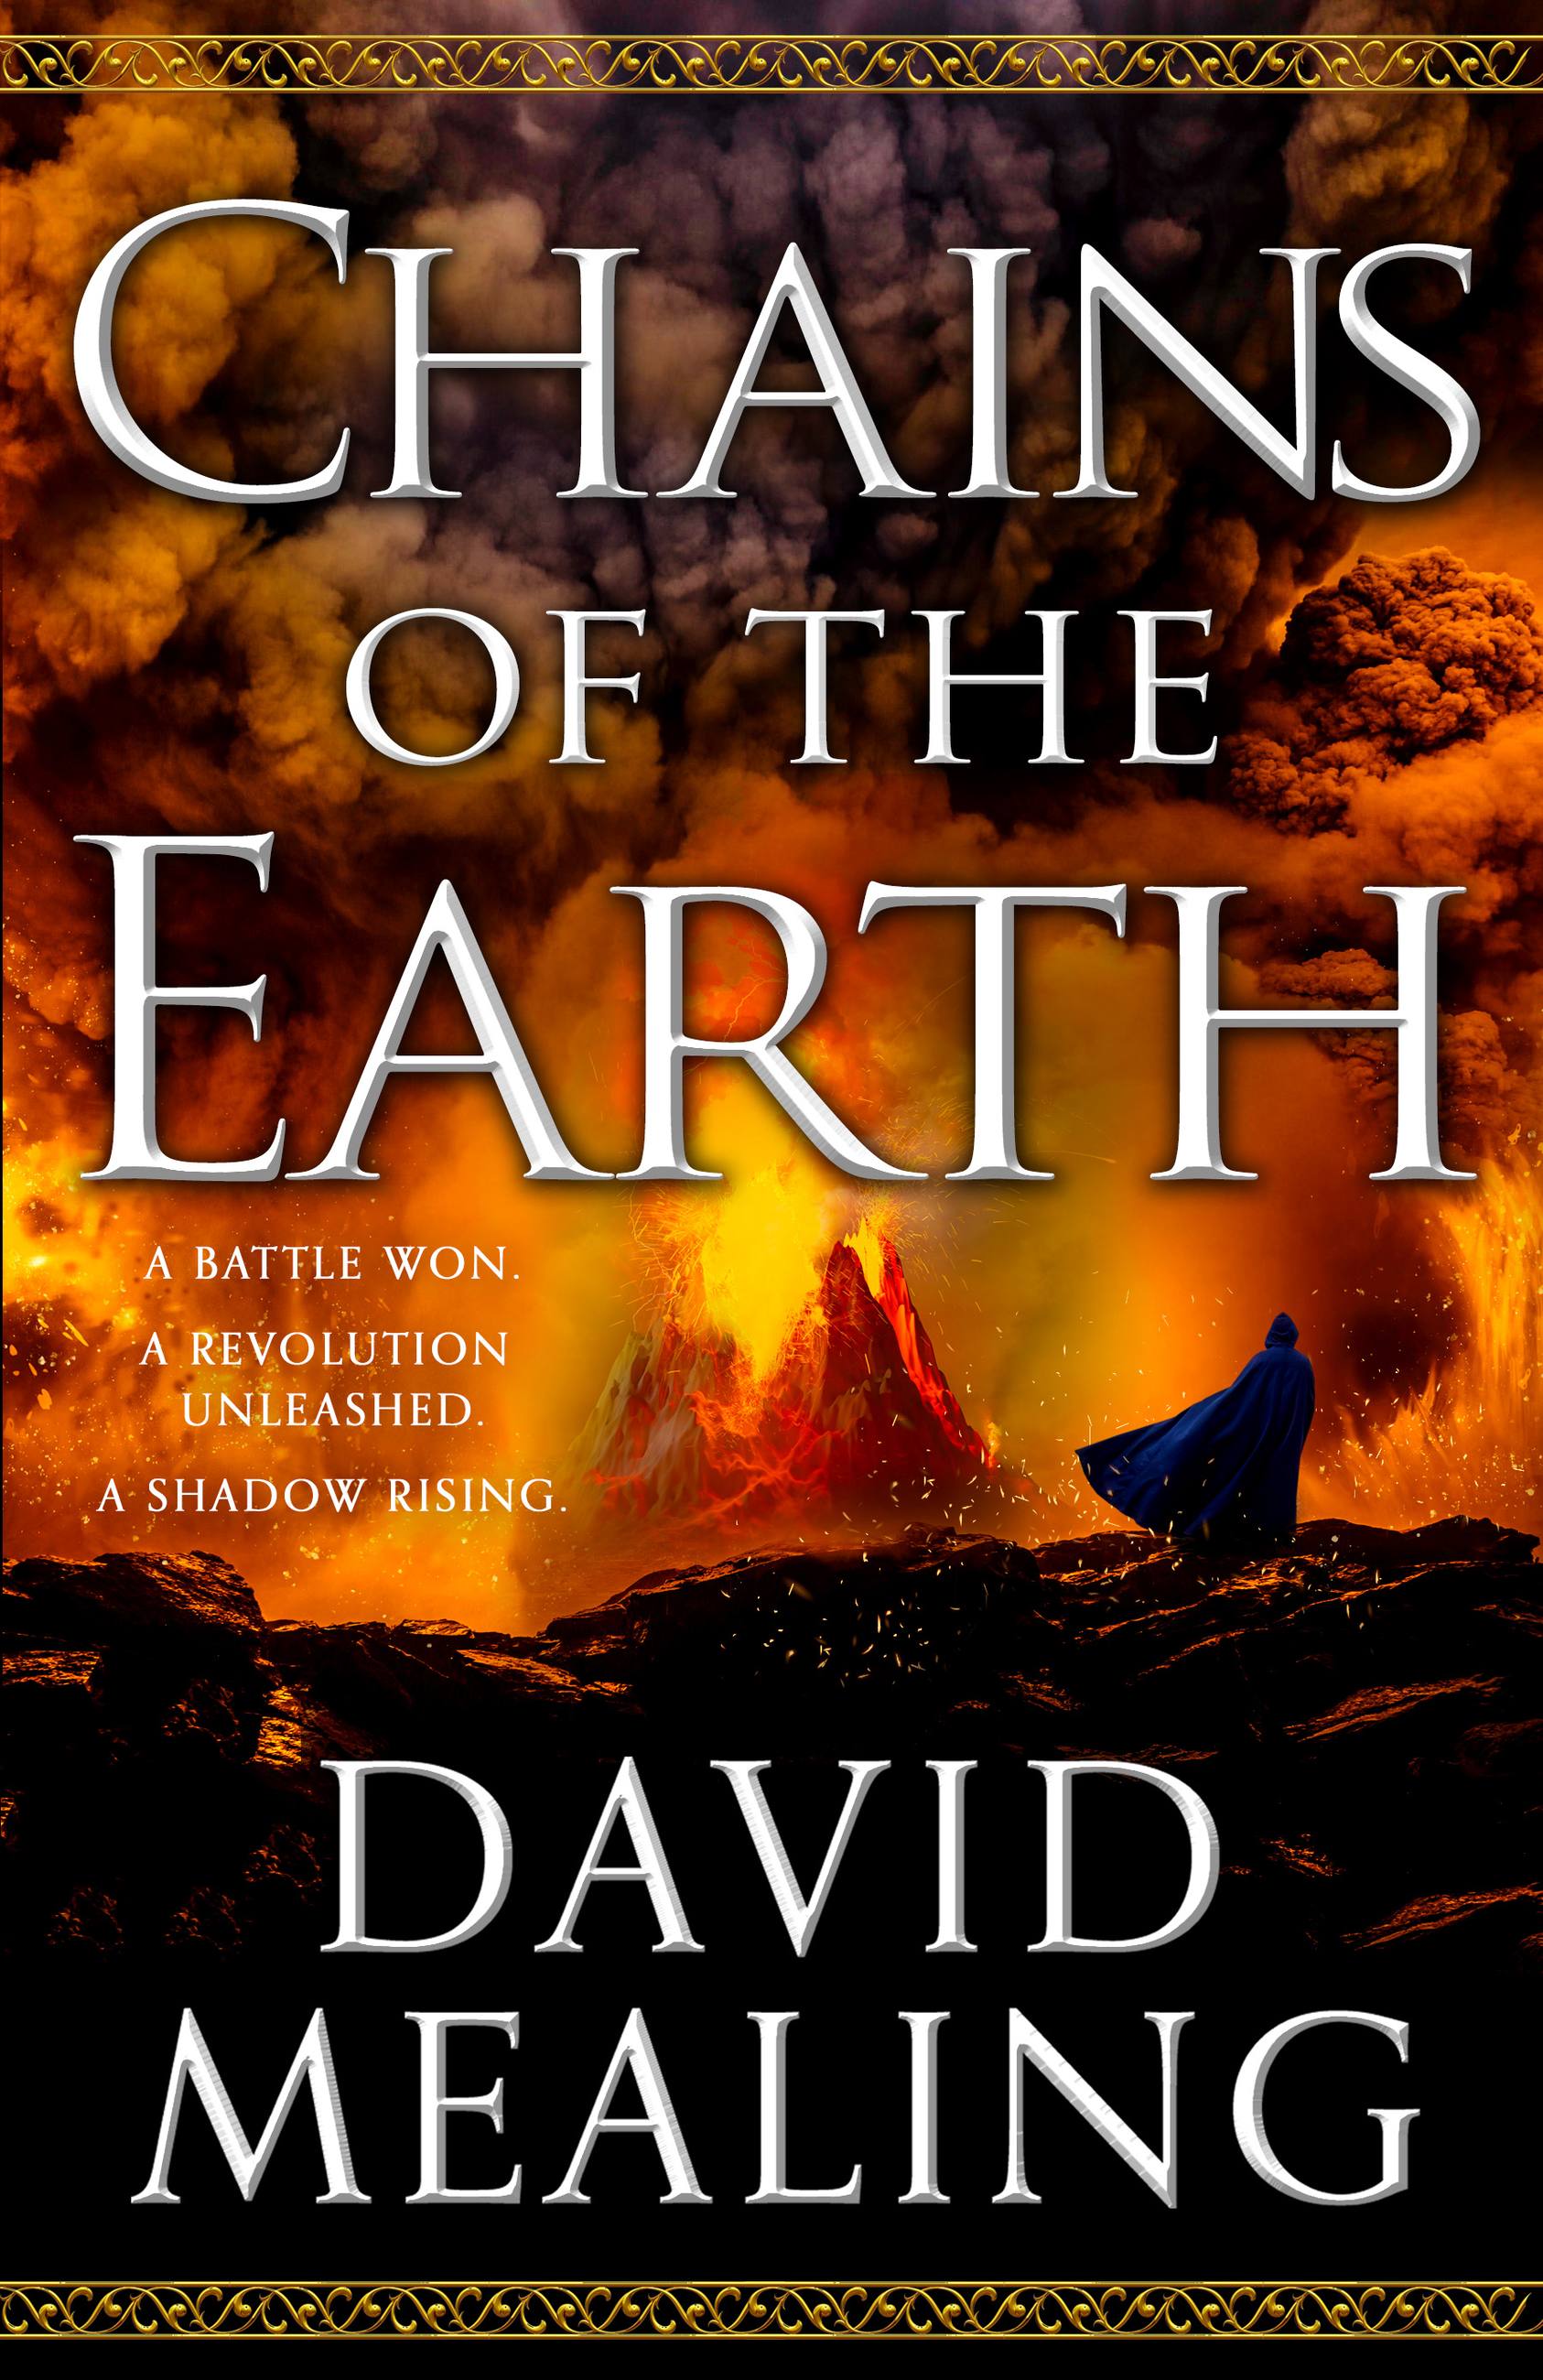 Chains of the Earth by David Mealing | Hachette Book Group